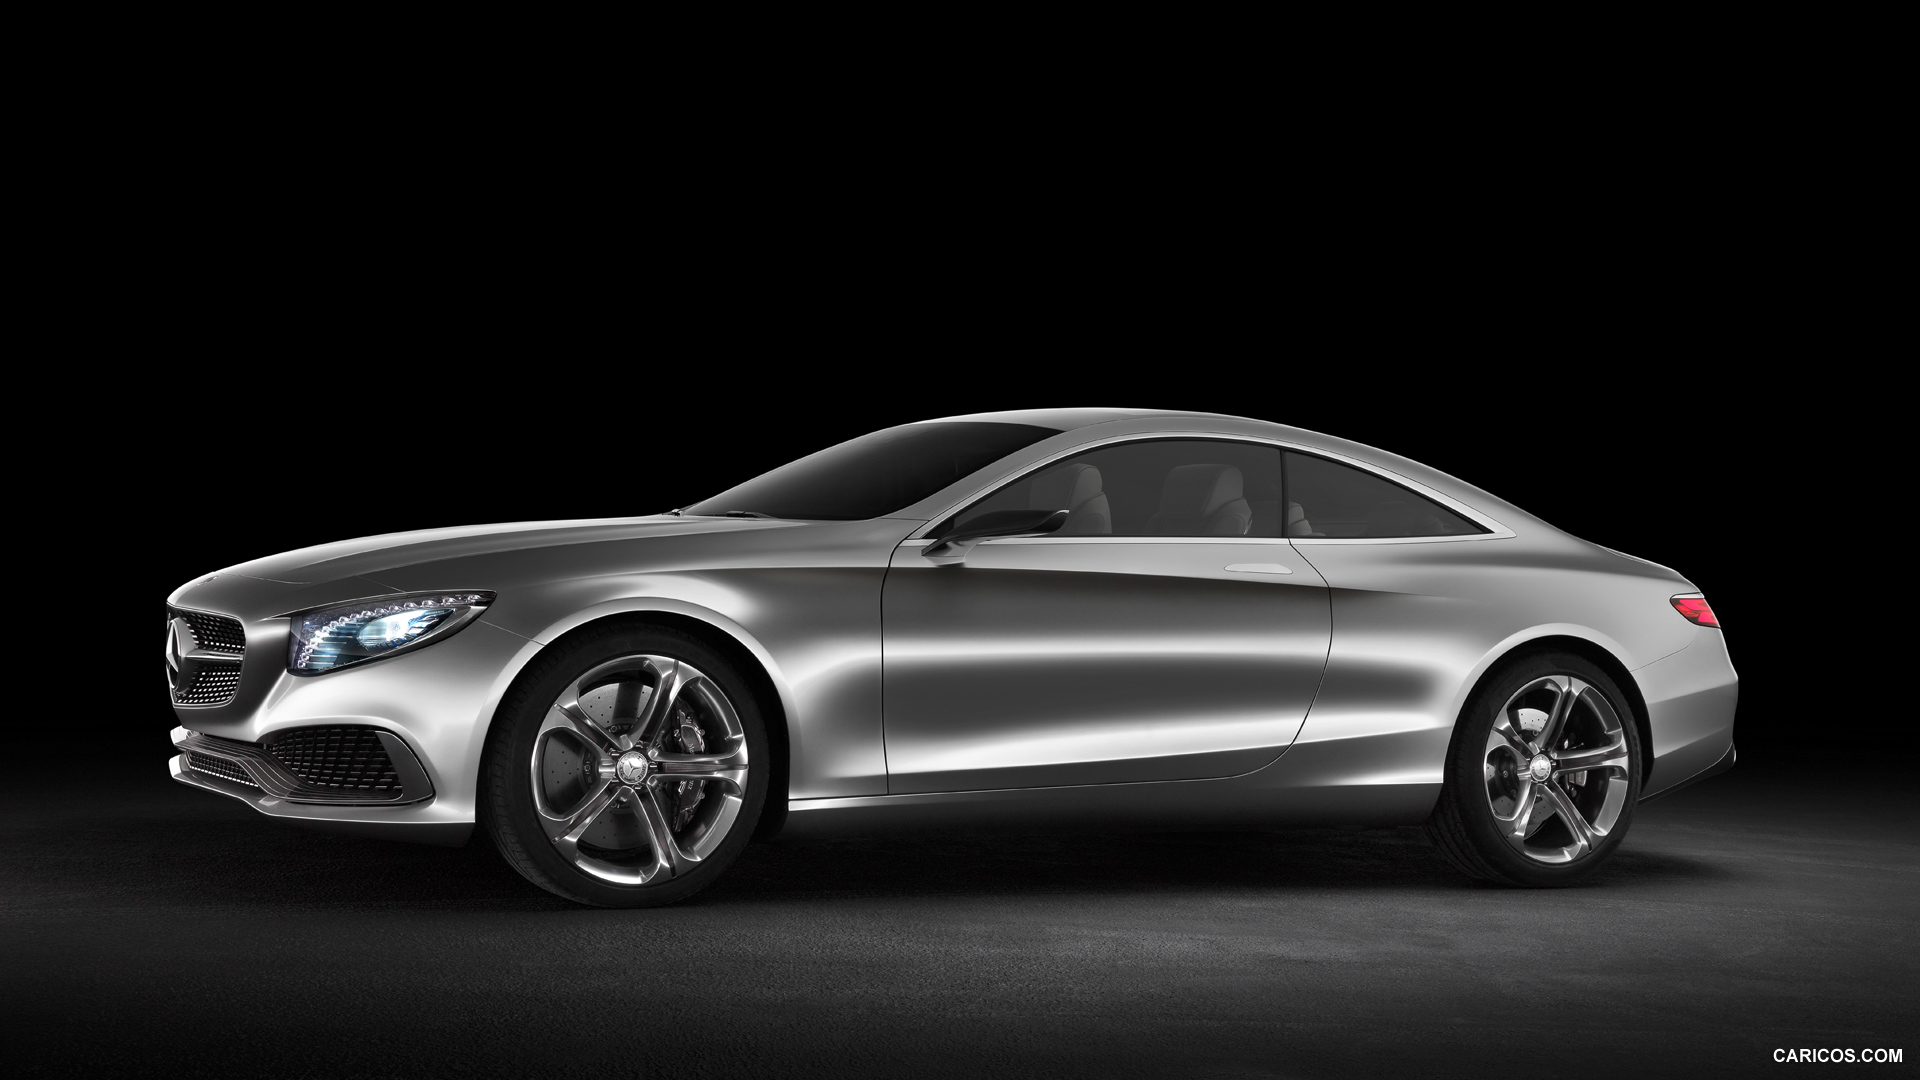 Mercedes-Benz S-Class Coupe Concept (2013)  - Side, #46 of 58